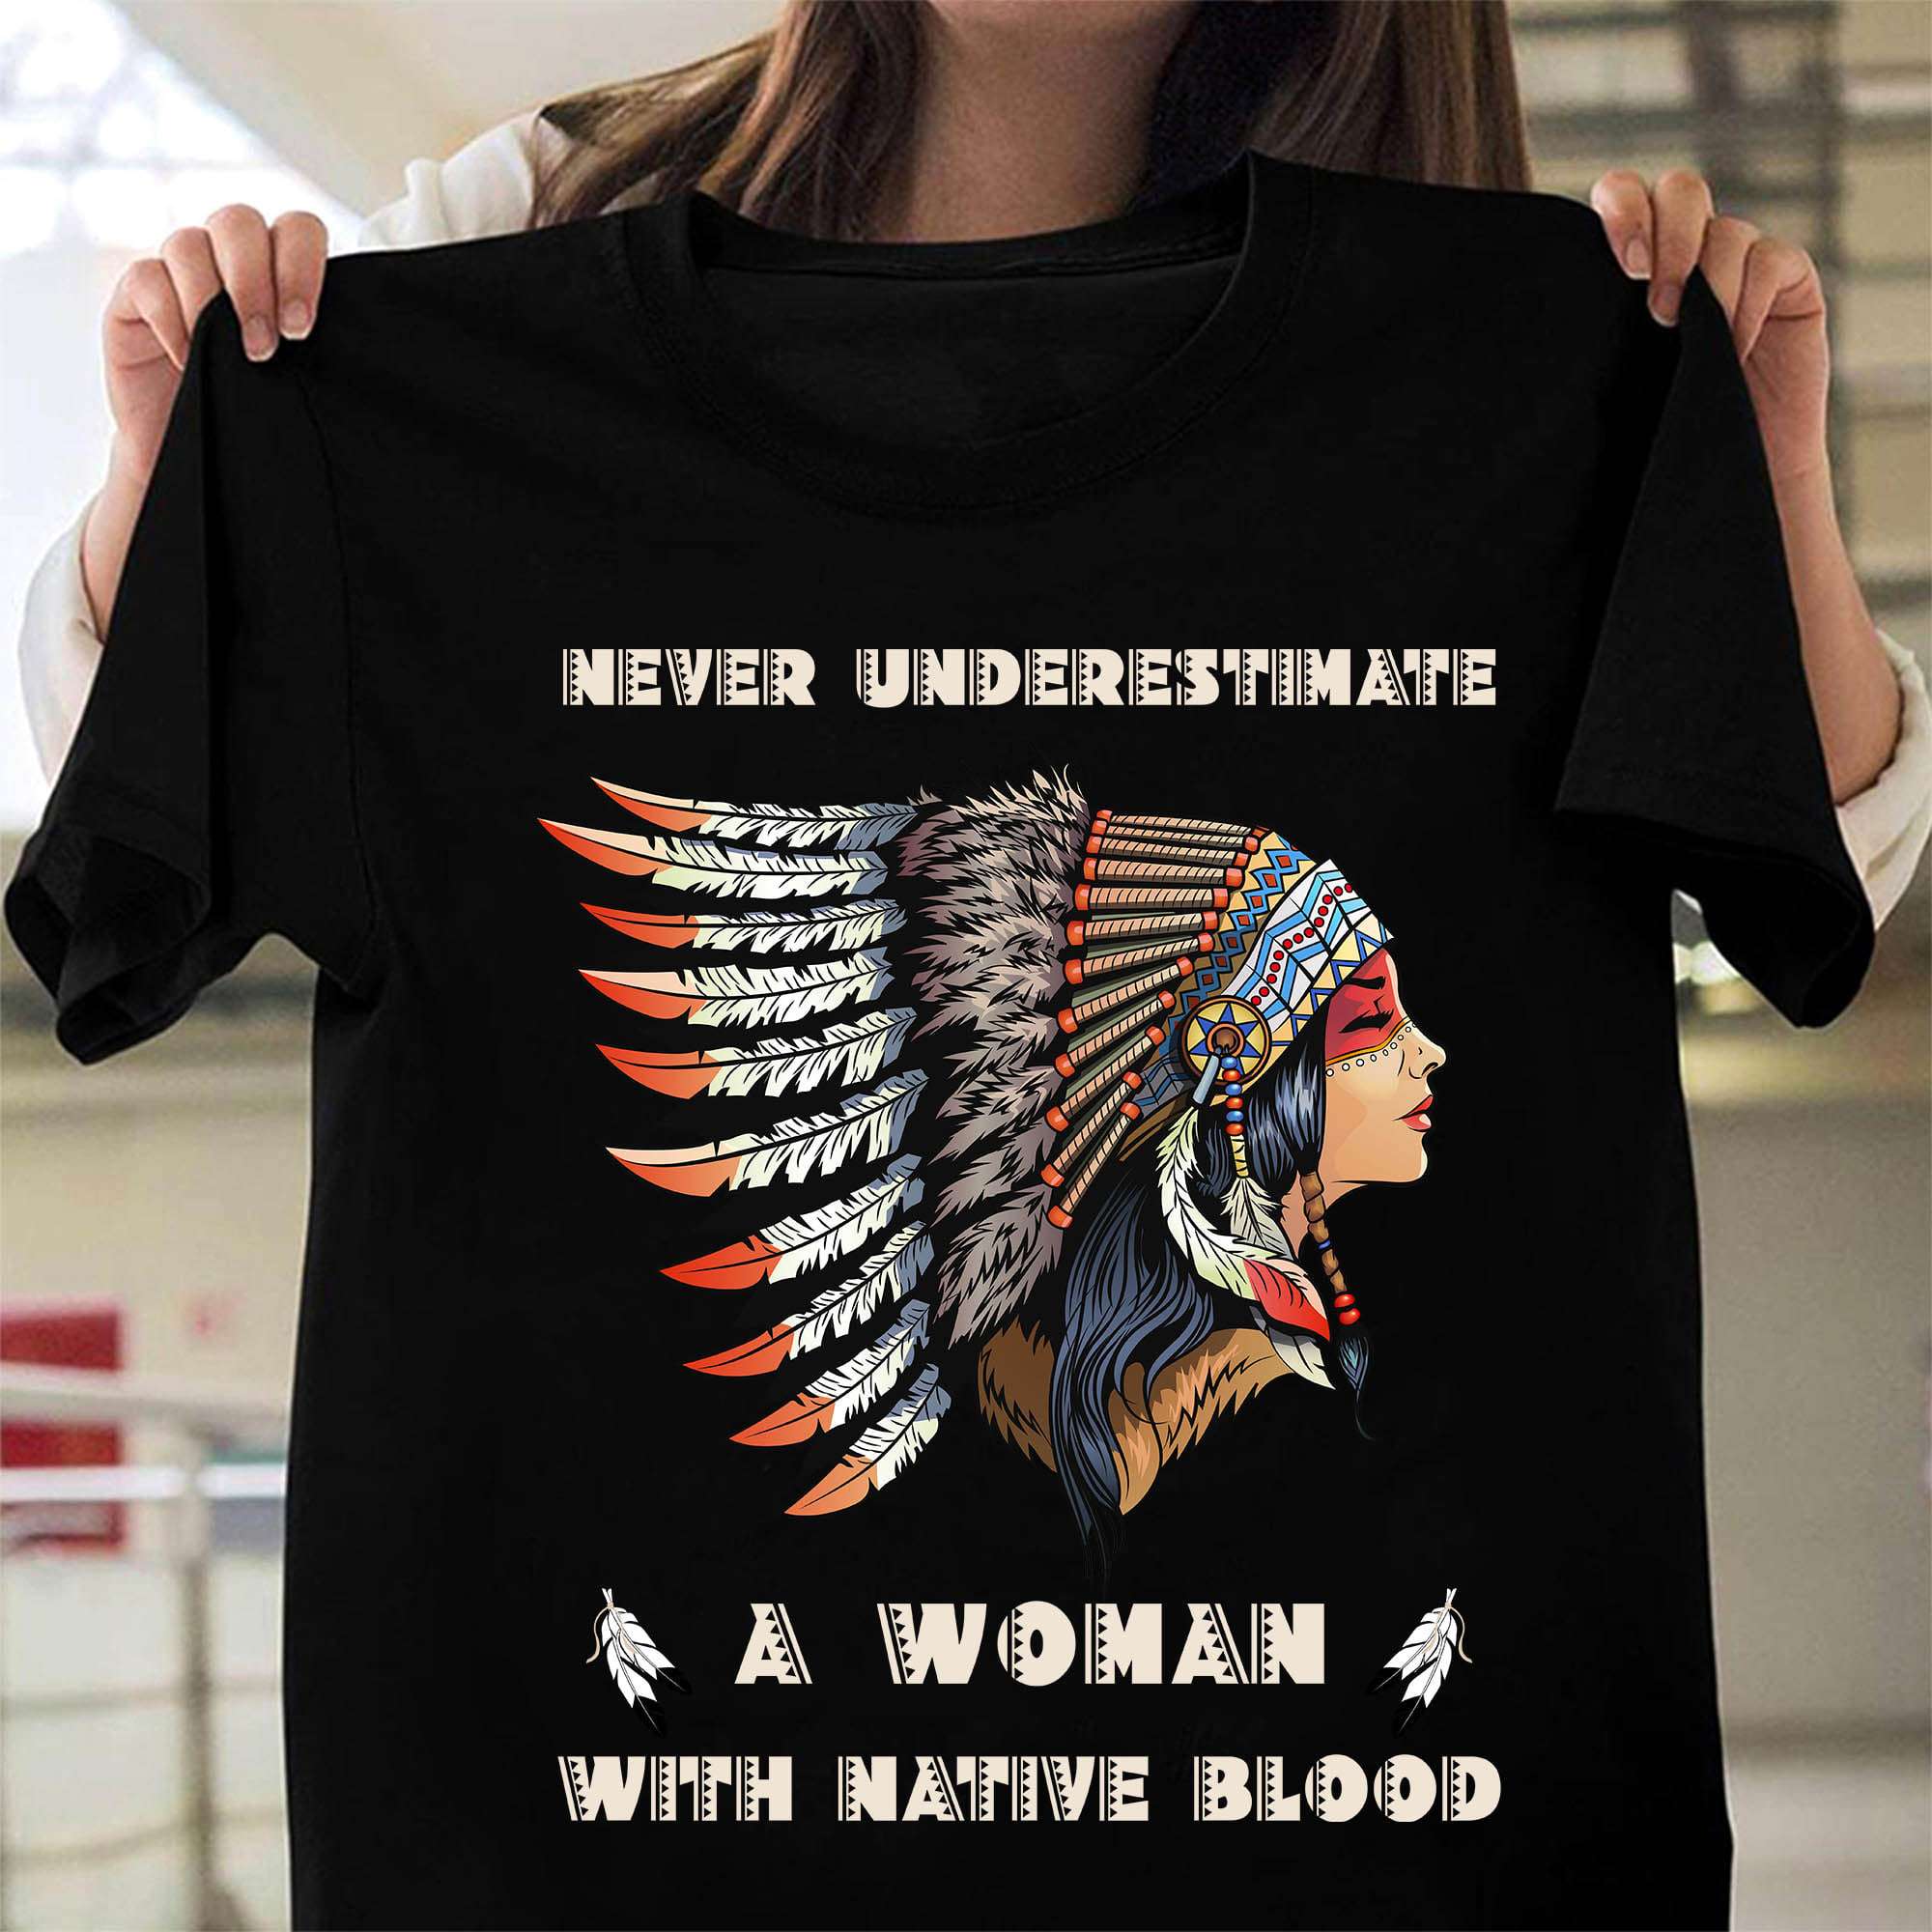 Native Woman, Native Person - Never underestimate a woman with native blood